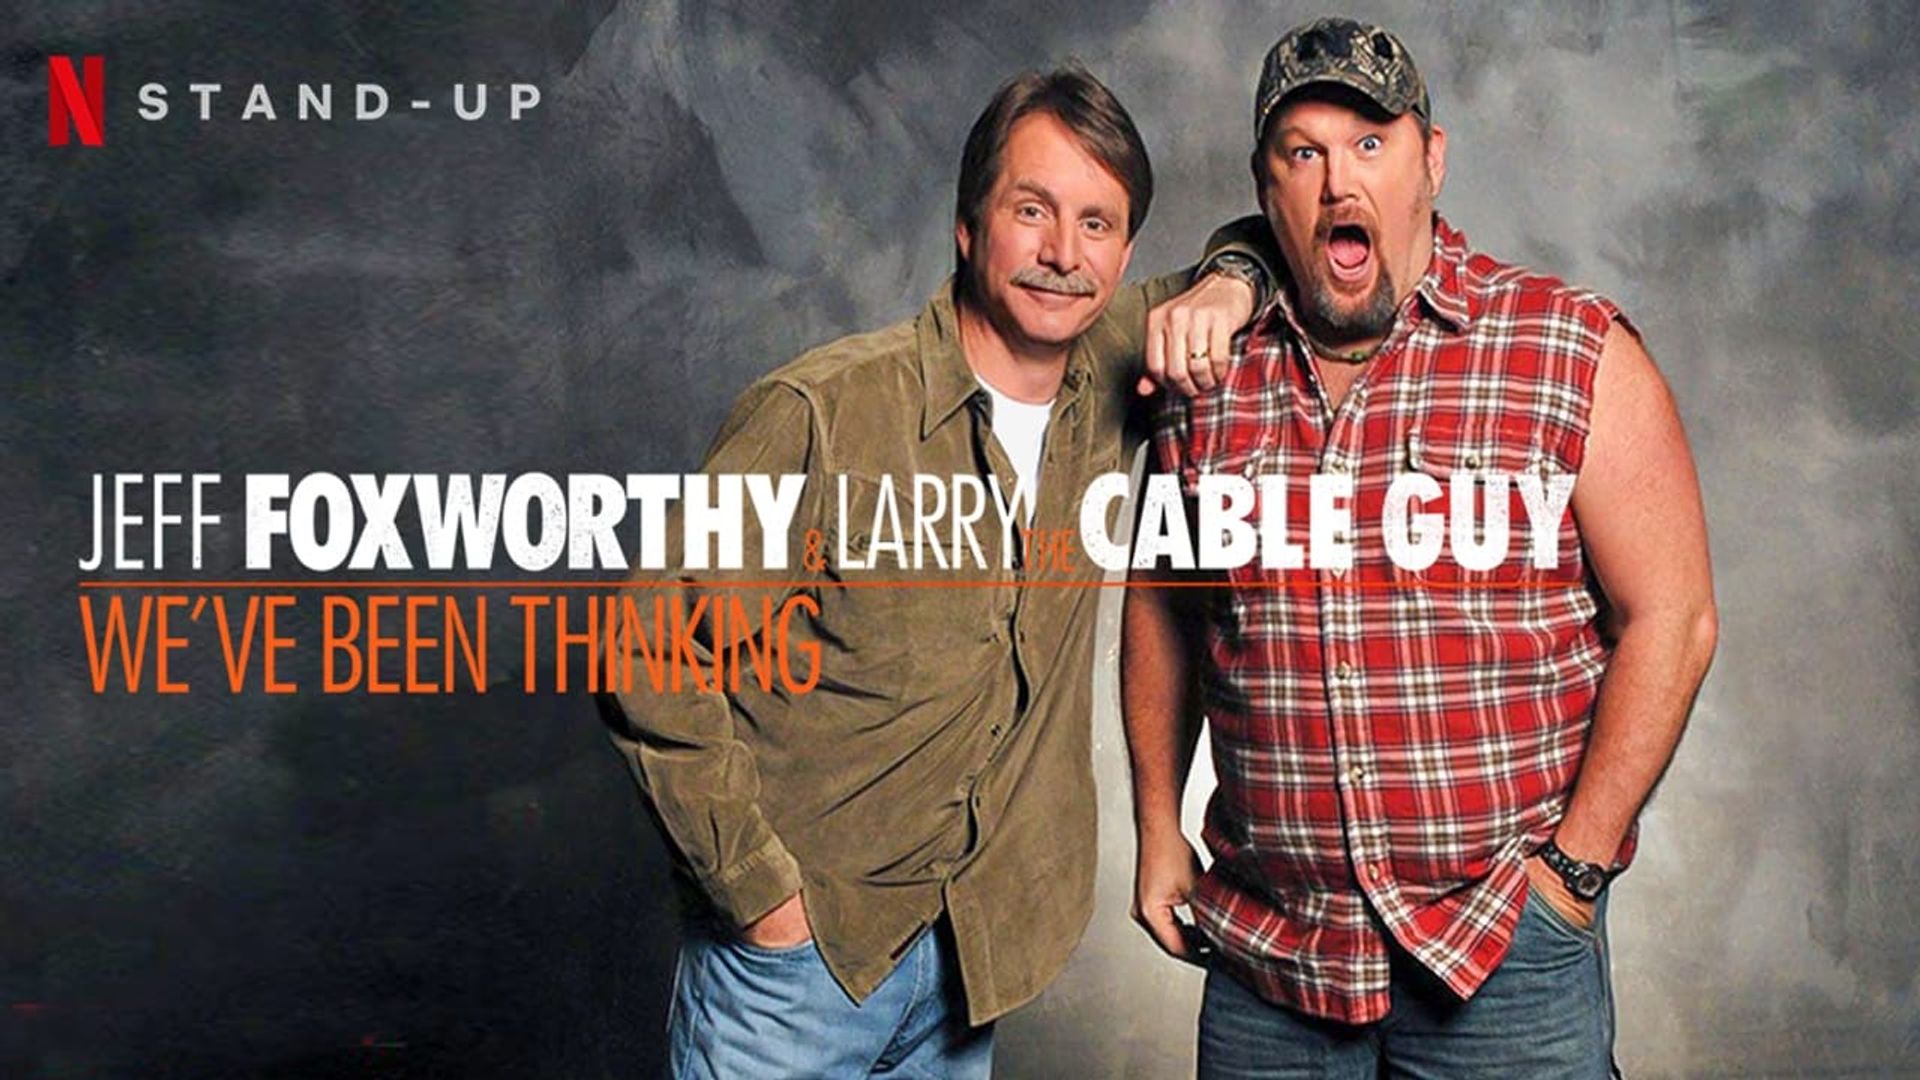 Jeff Foxworthy & Larry the Cable Guy: We've Been Thinking background